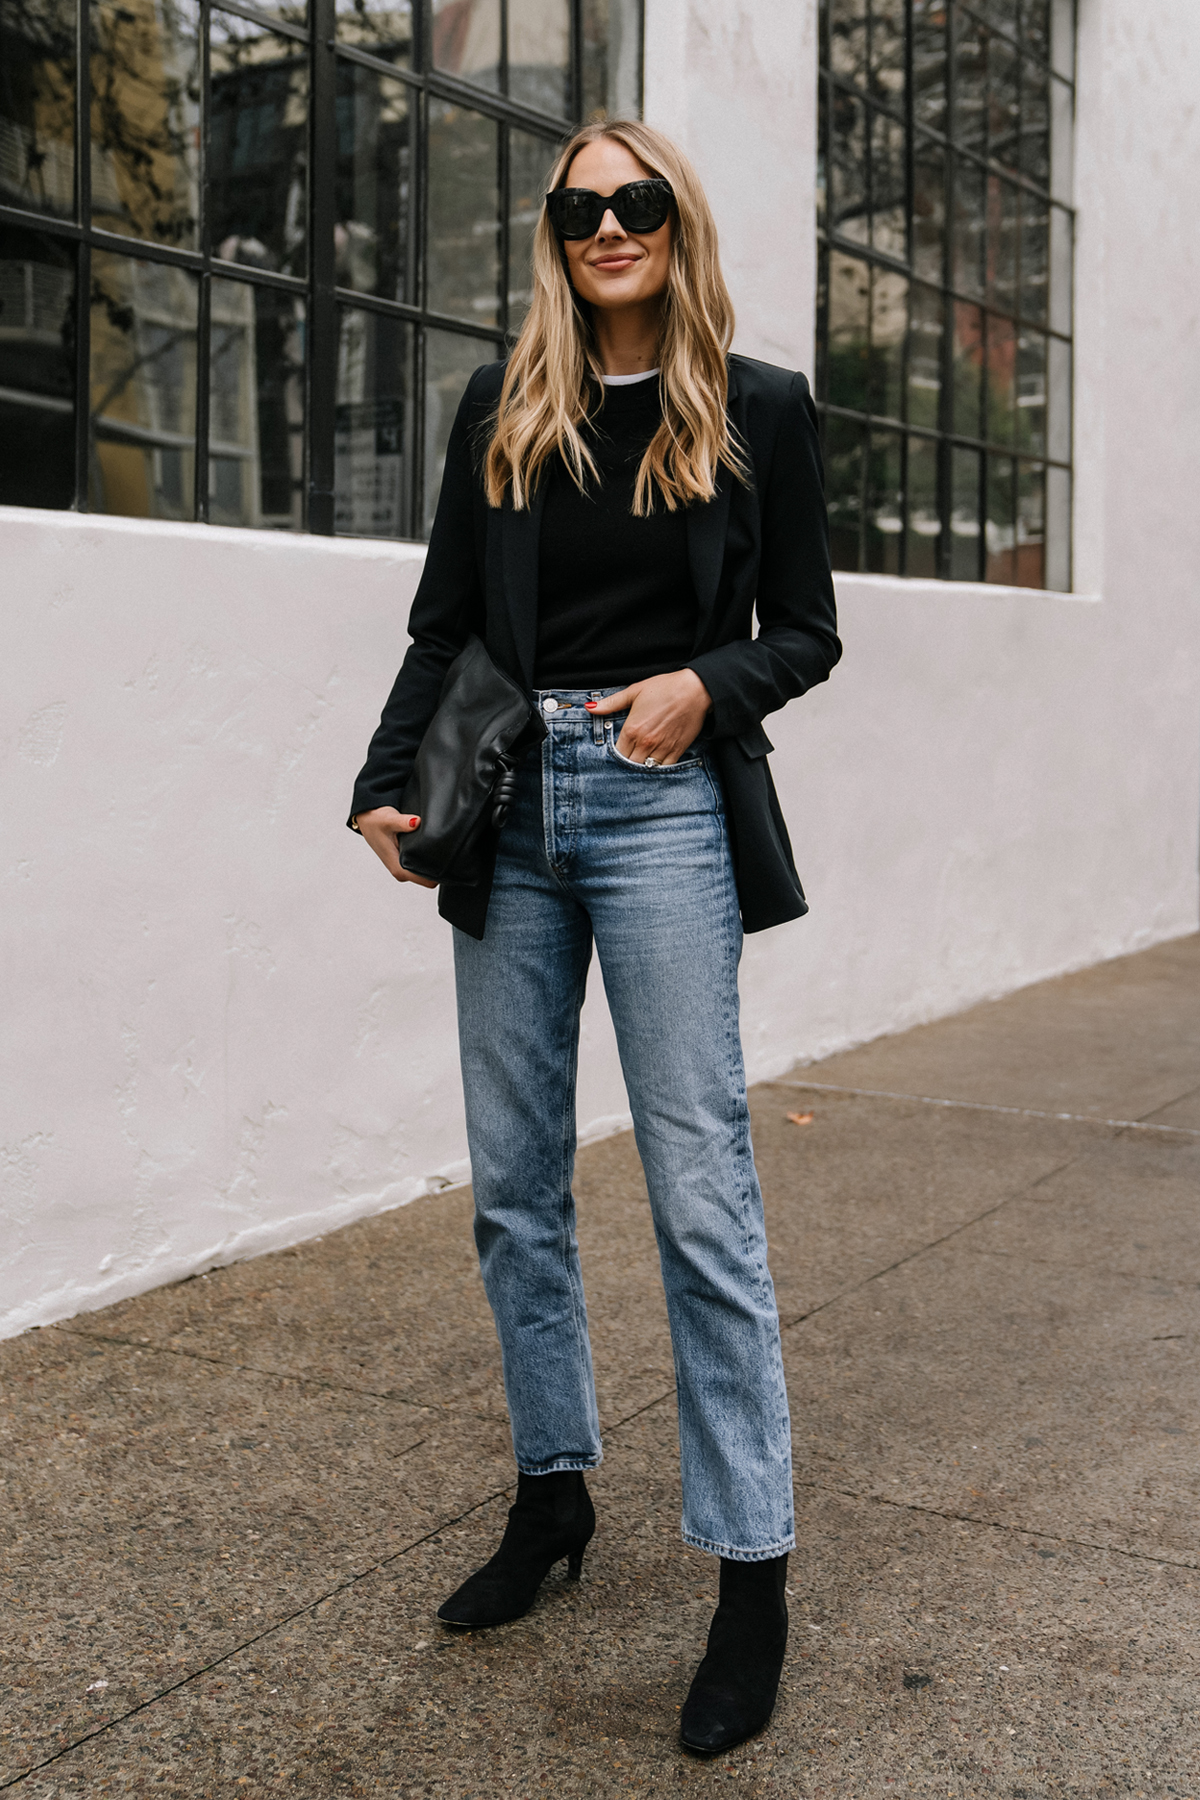 Outfit Ideas with Jeans for Business Casual Days - Fashion Jackson